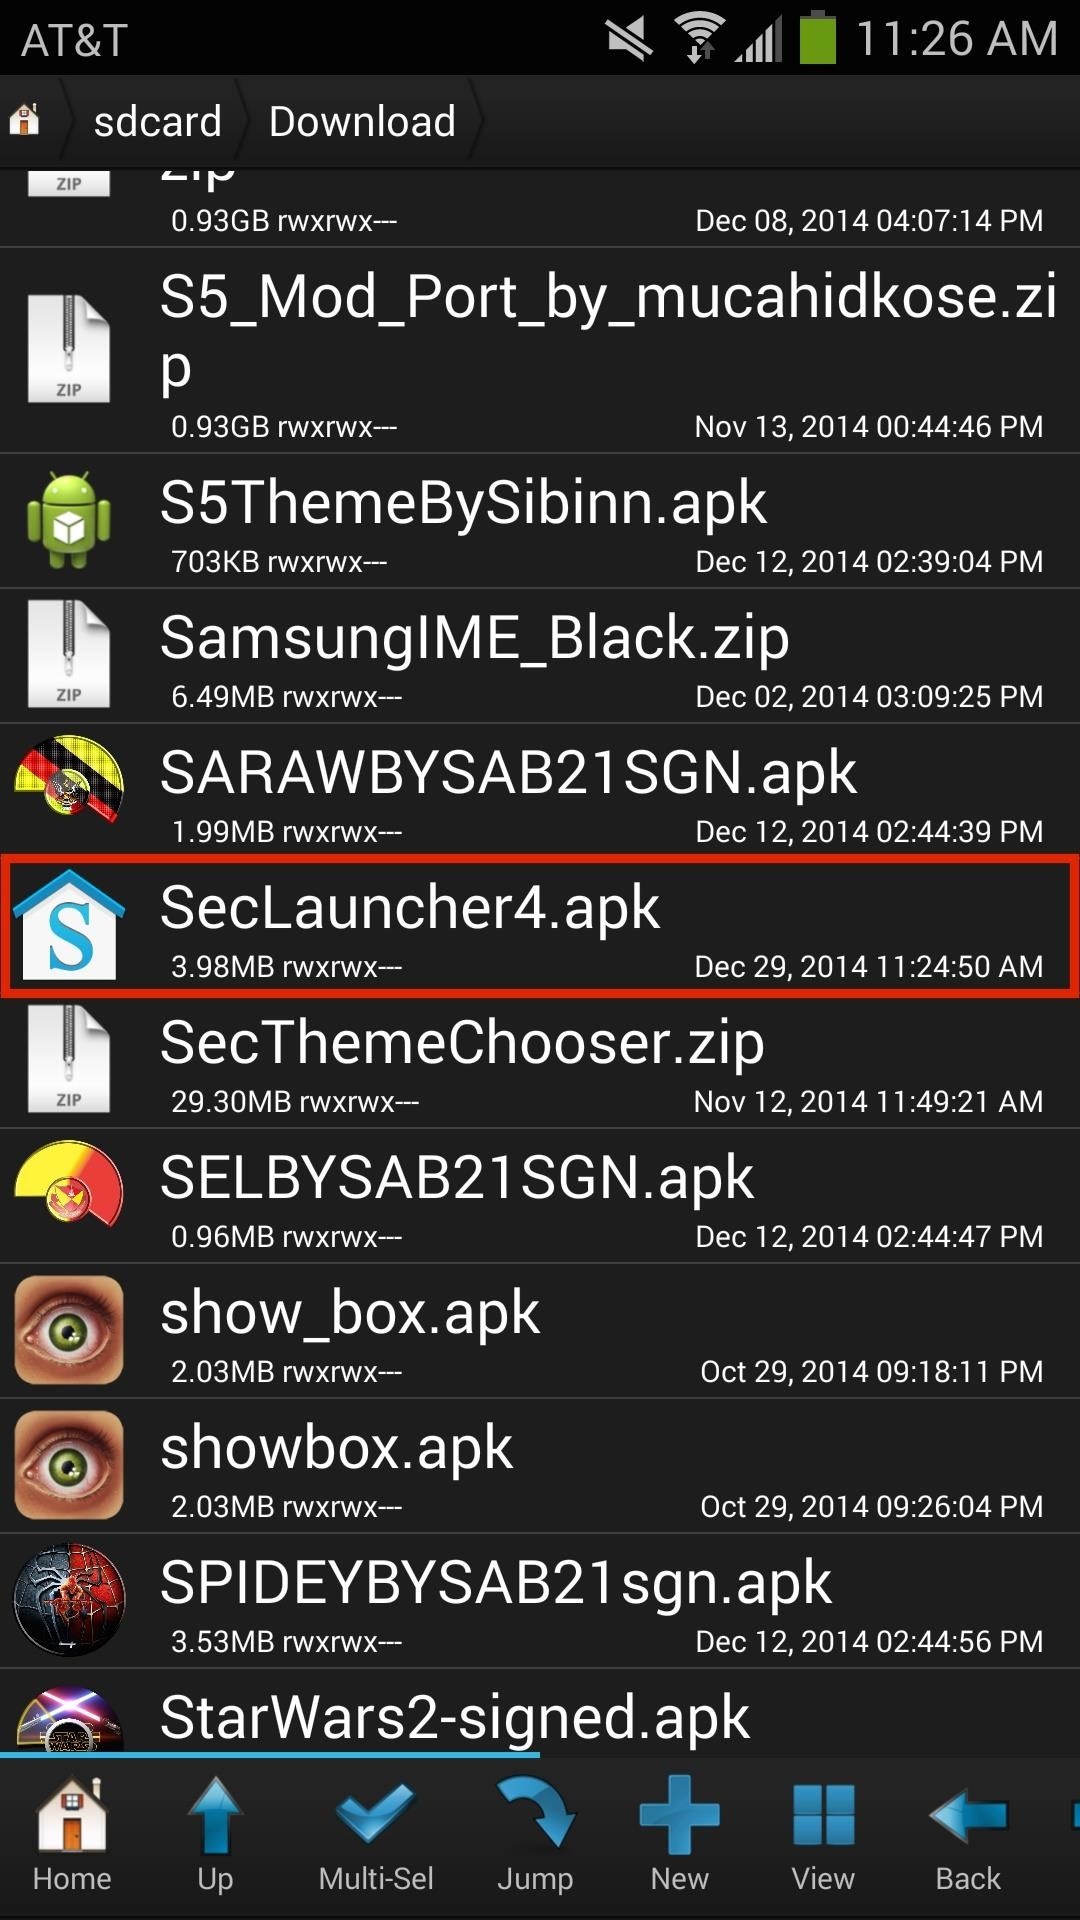 Speed Up the Stock TouchWiz Launcher on Your Galaxy Note 3